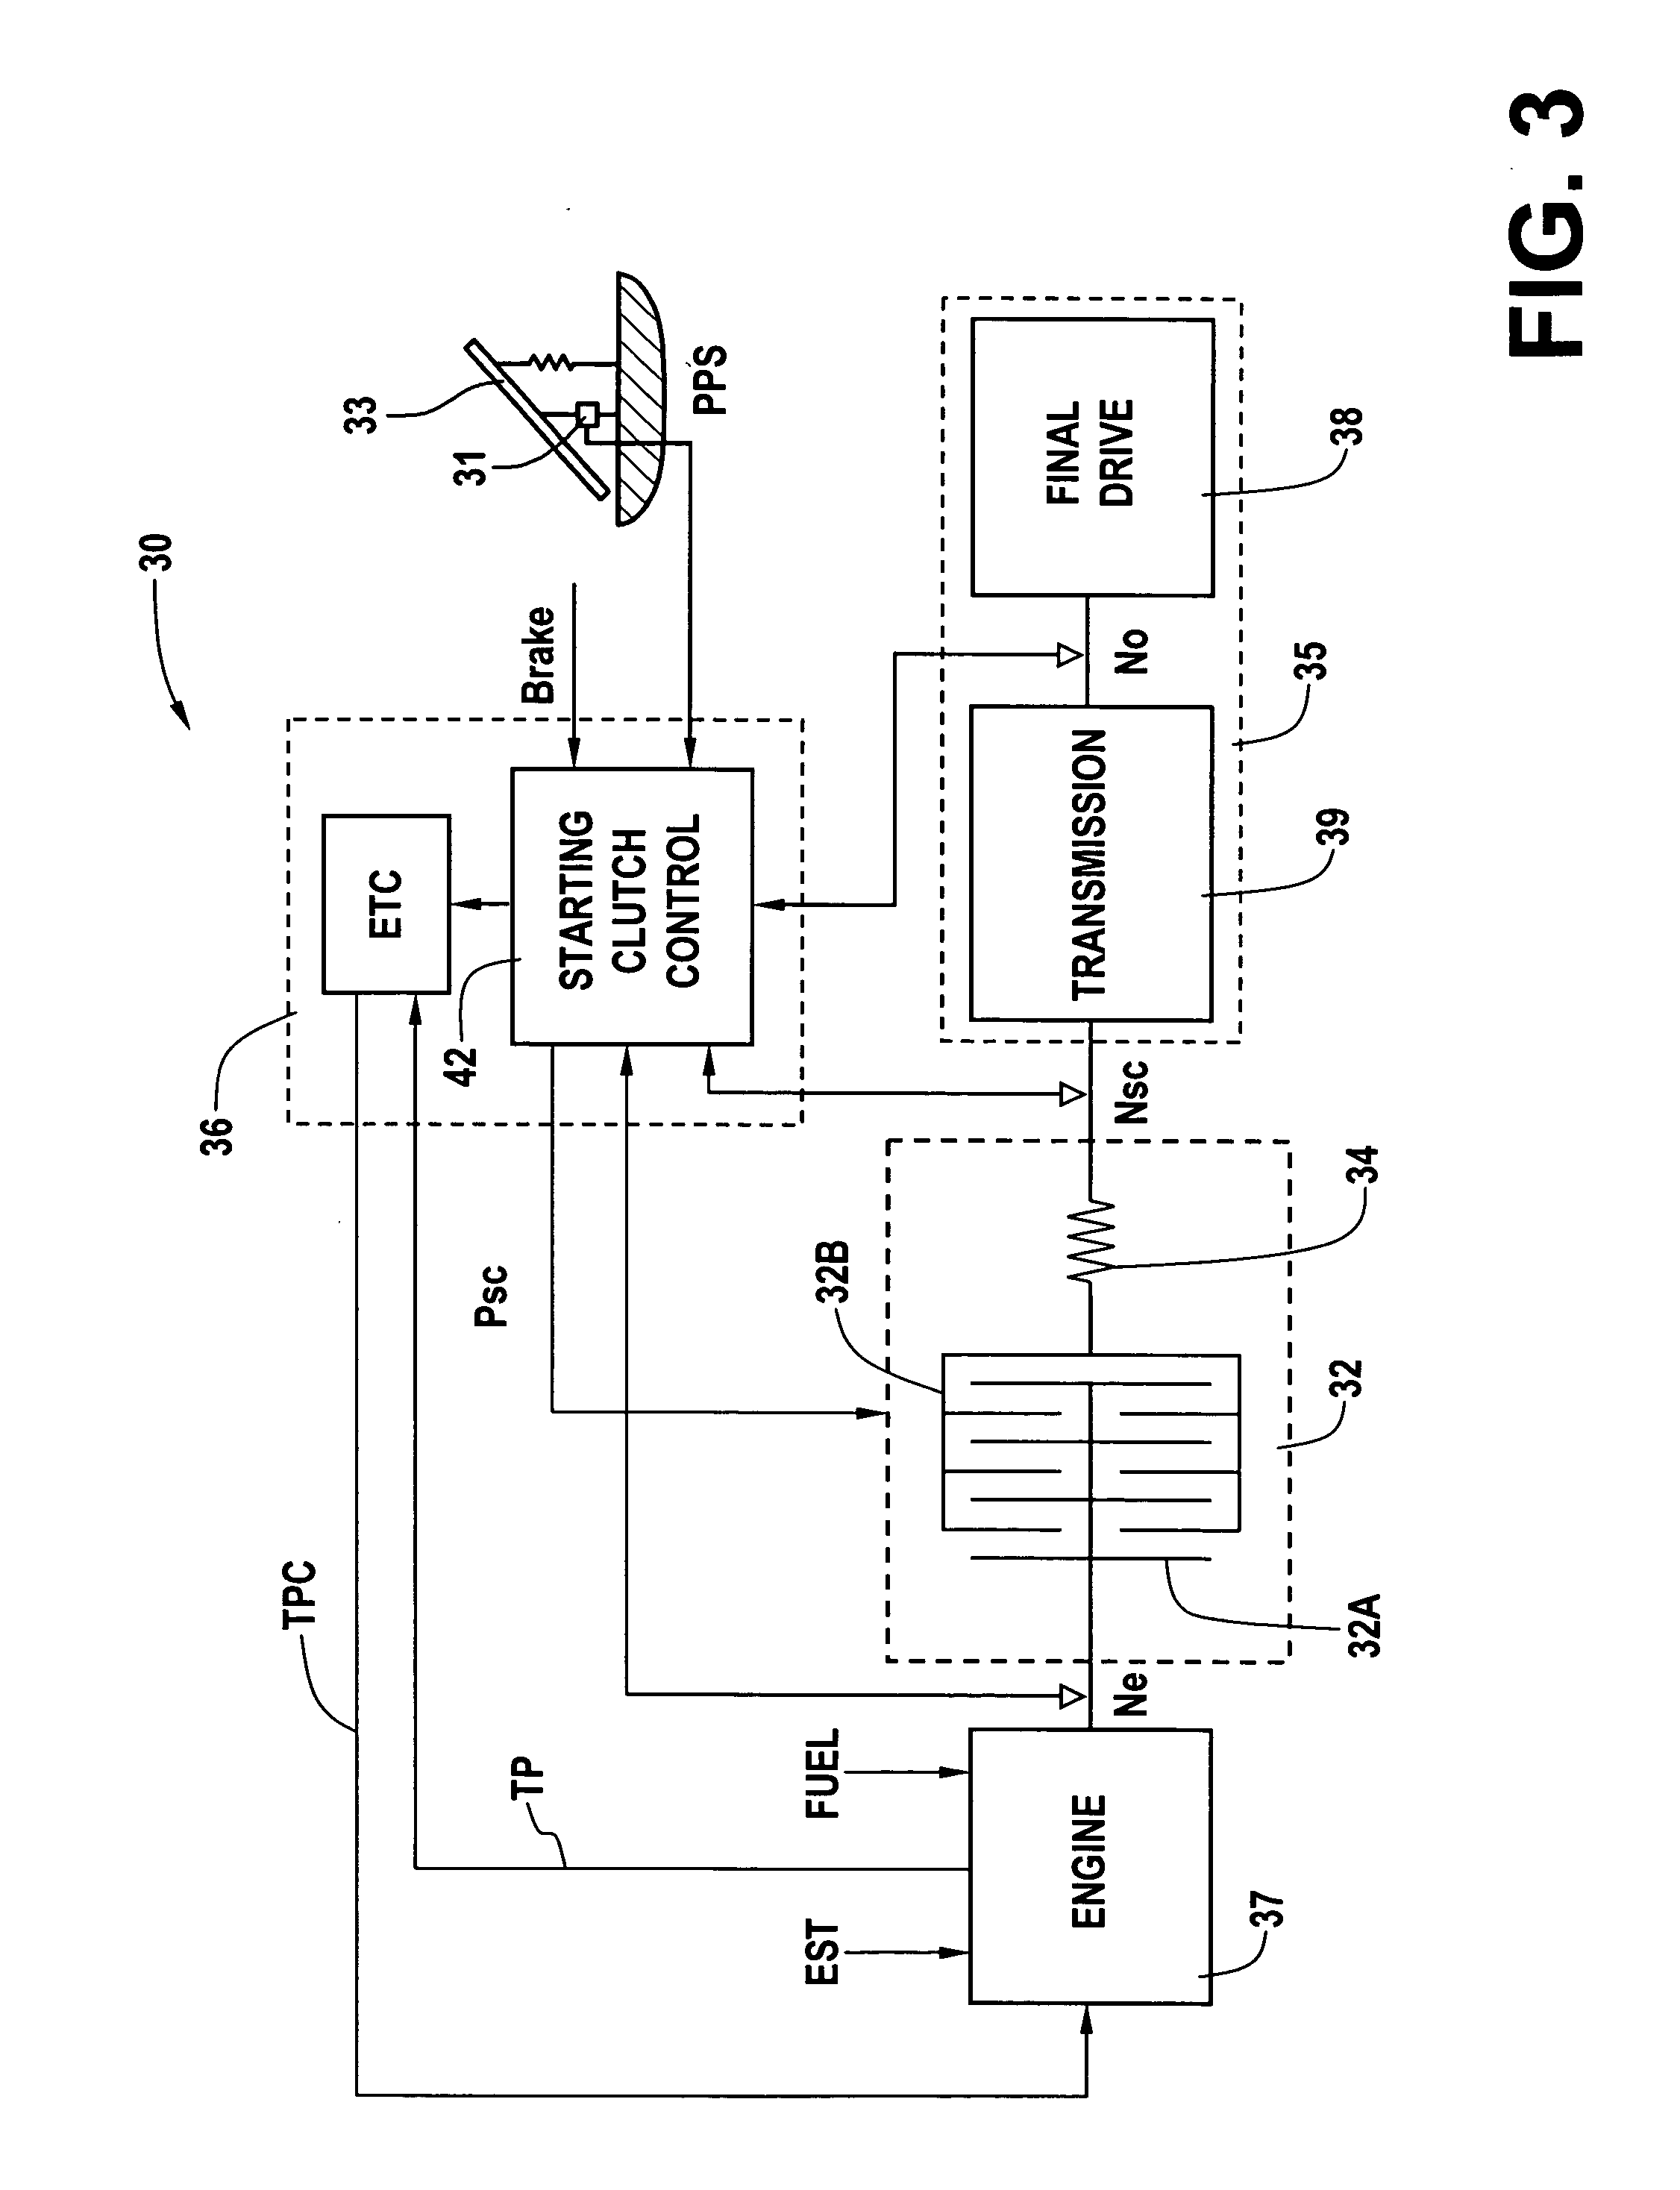 Engine and driveline torque transfer device control